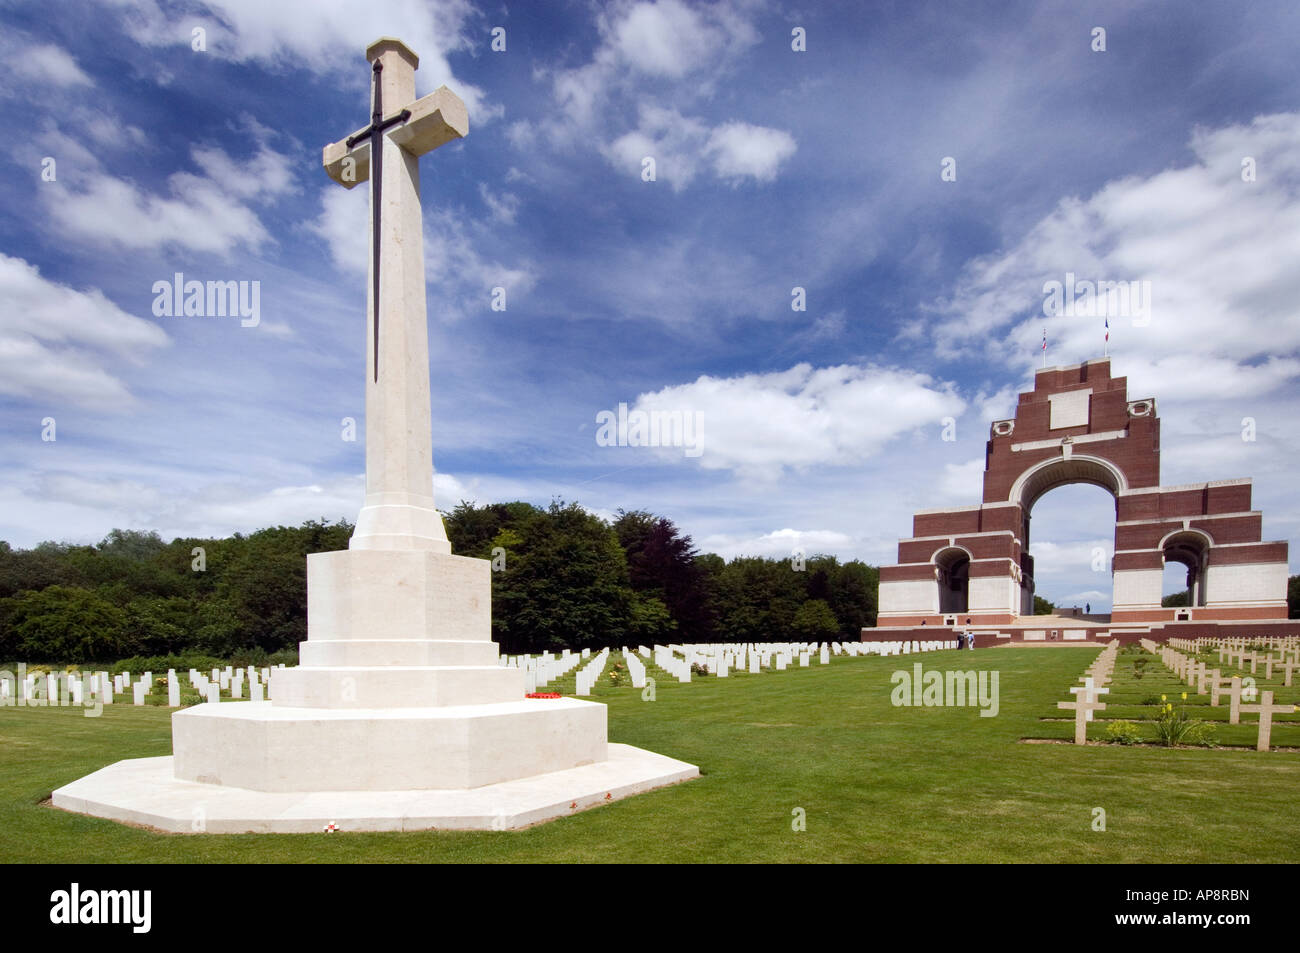 Cross of sacrifice in the cemetery at the rear of the Thiepval Monument to the missing of WW1 on the Somme, France Stock Photo